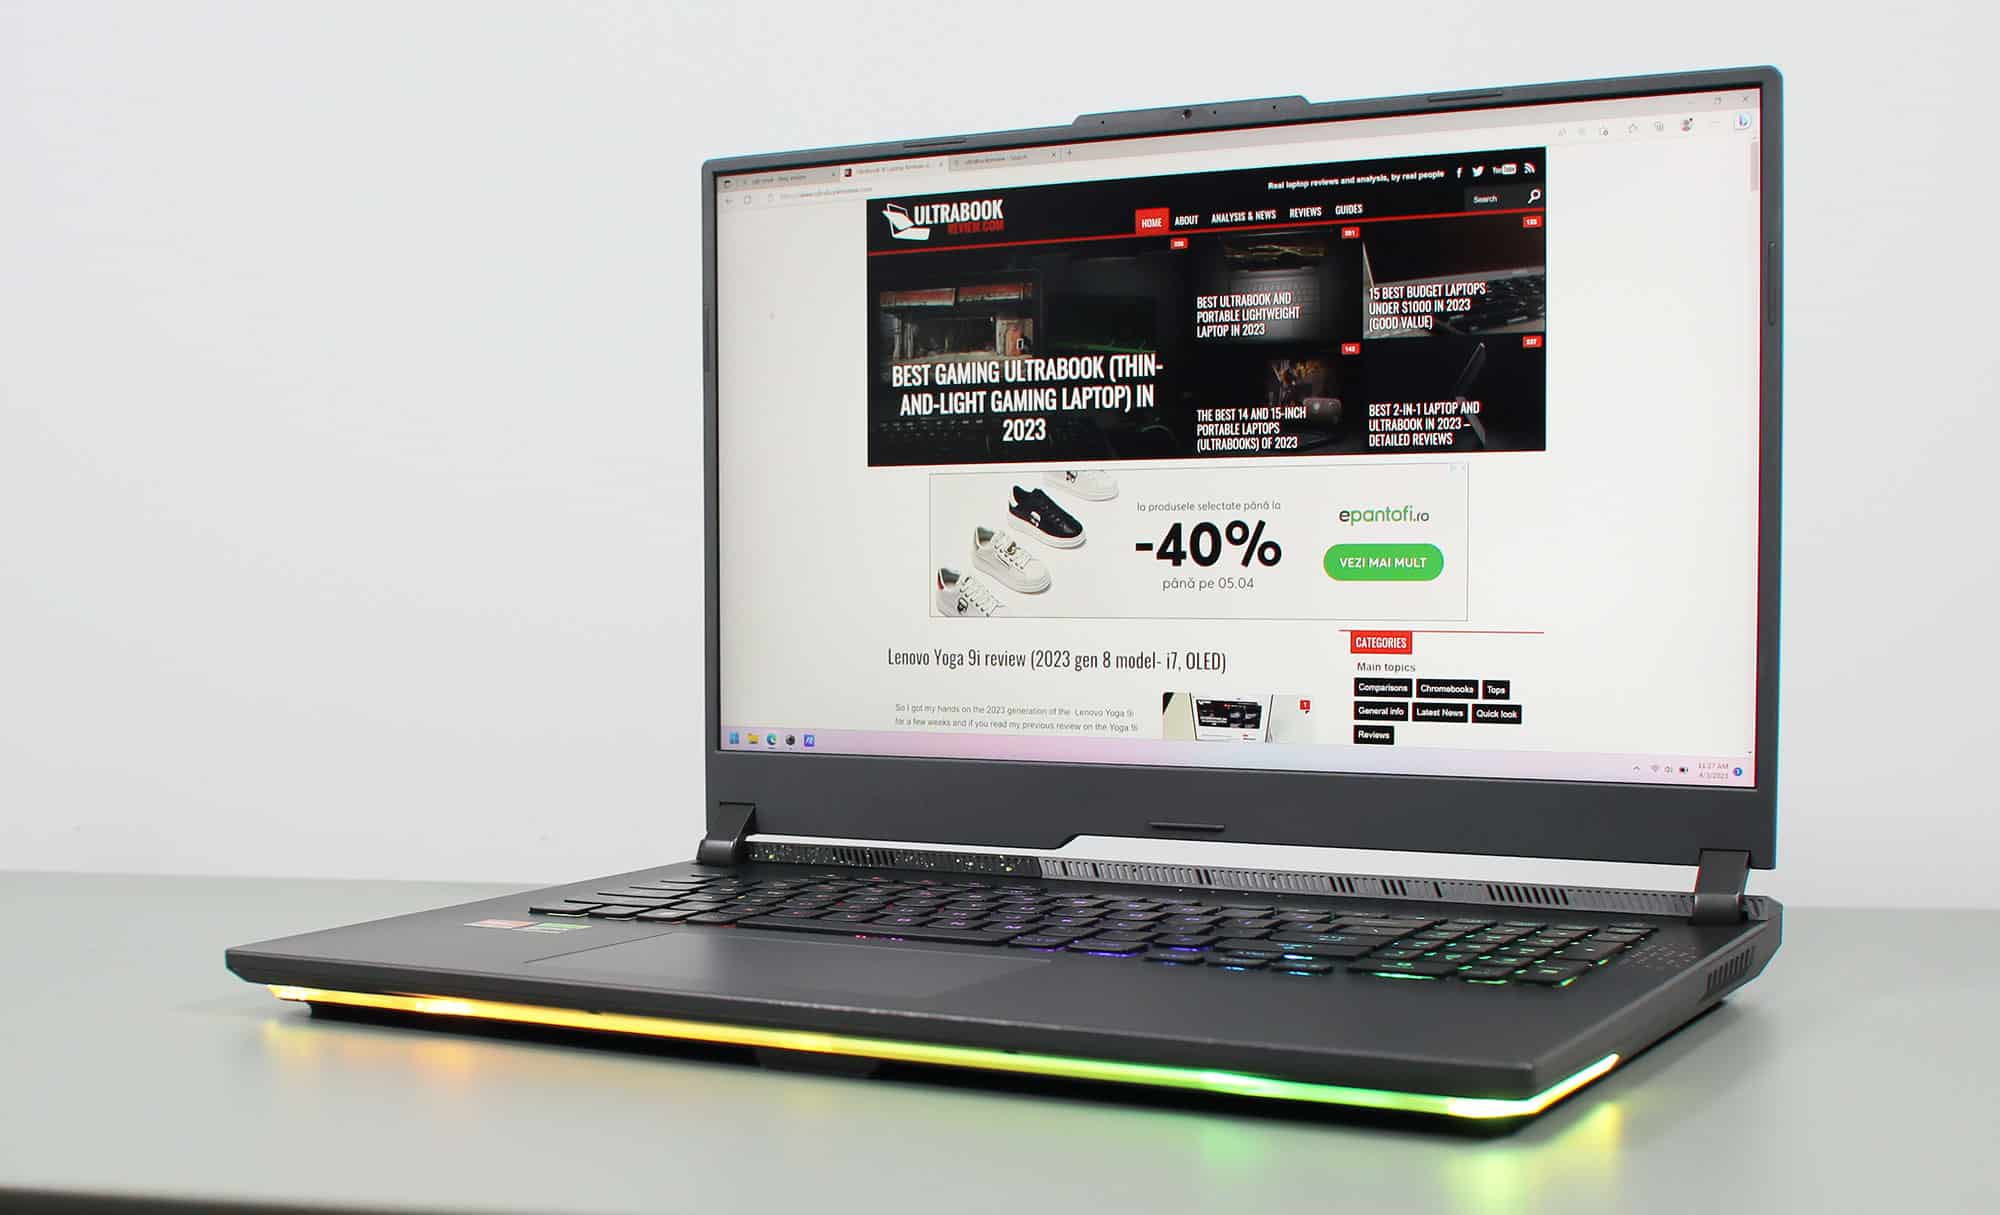 NVIDIA GeForce RTX 4060 (Laptop, 140W) in 43 gameplay videos with  benchmarks